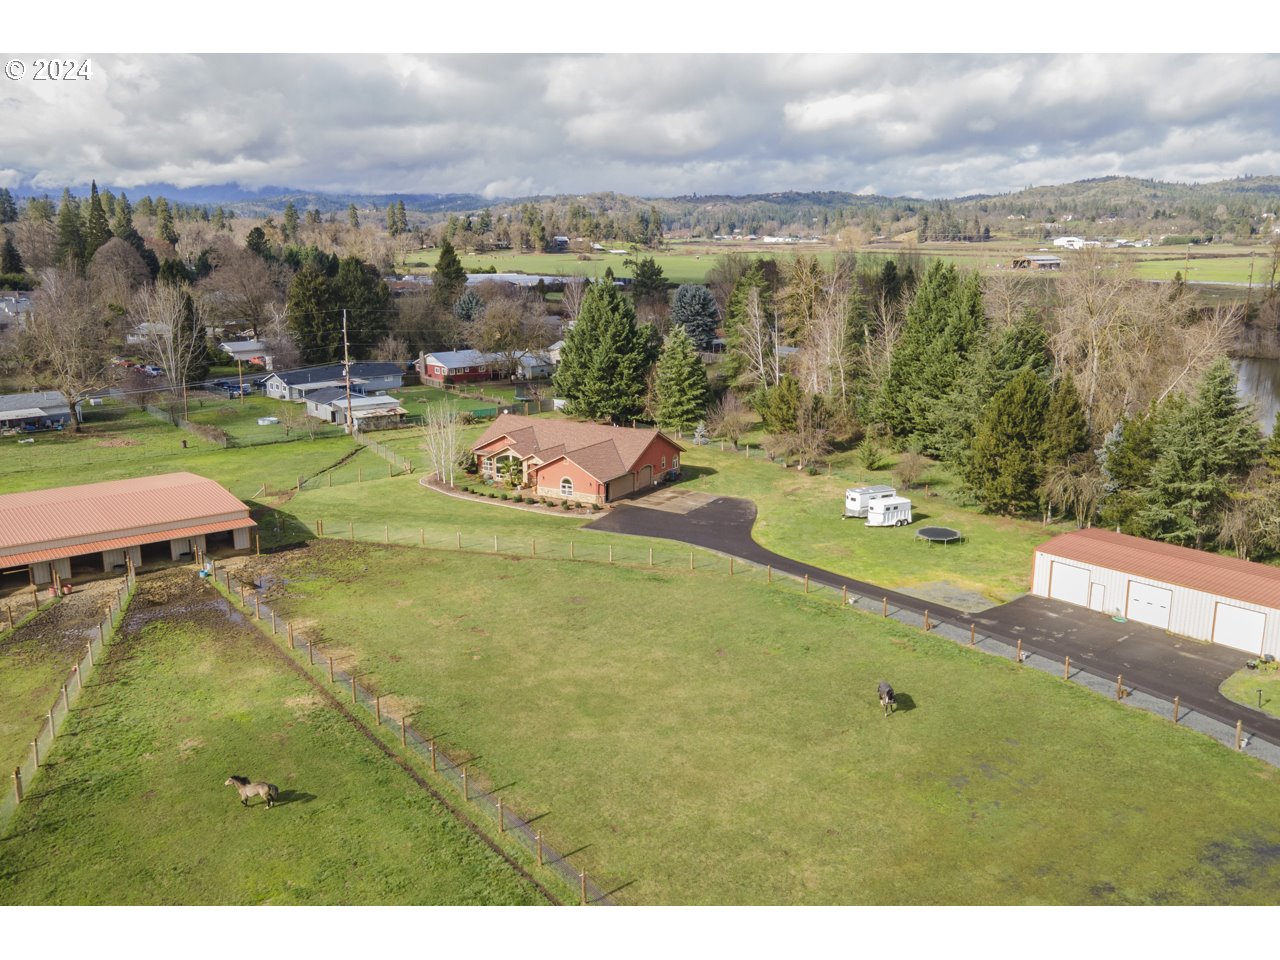 2740 LOWER RIVER RD, Grants Pass, OR 